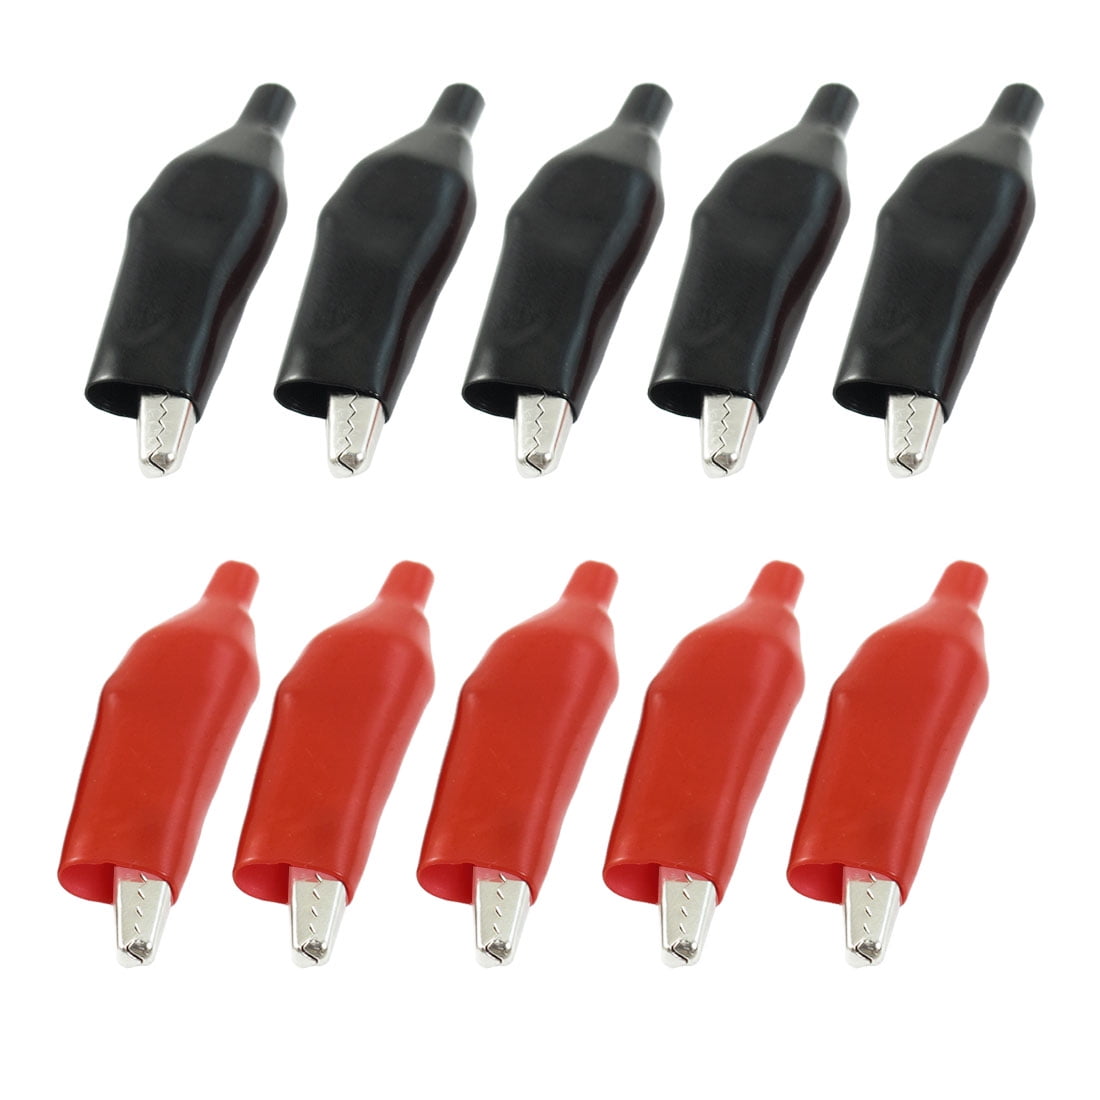 Crocodile Clips Alligator Clips Battery Charger Clips 45mm Red/Black Test Clips